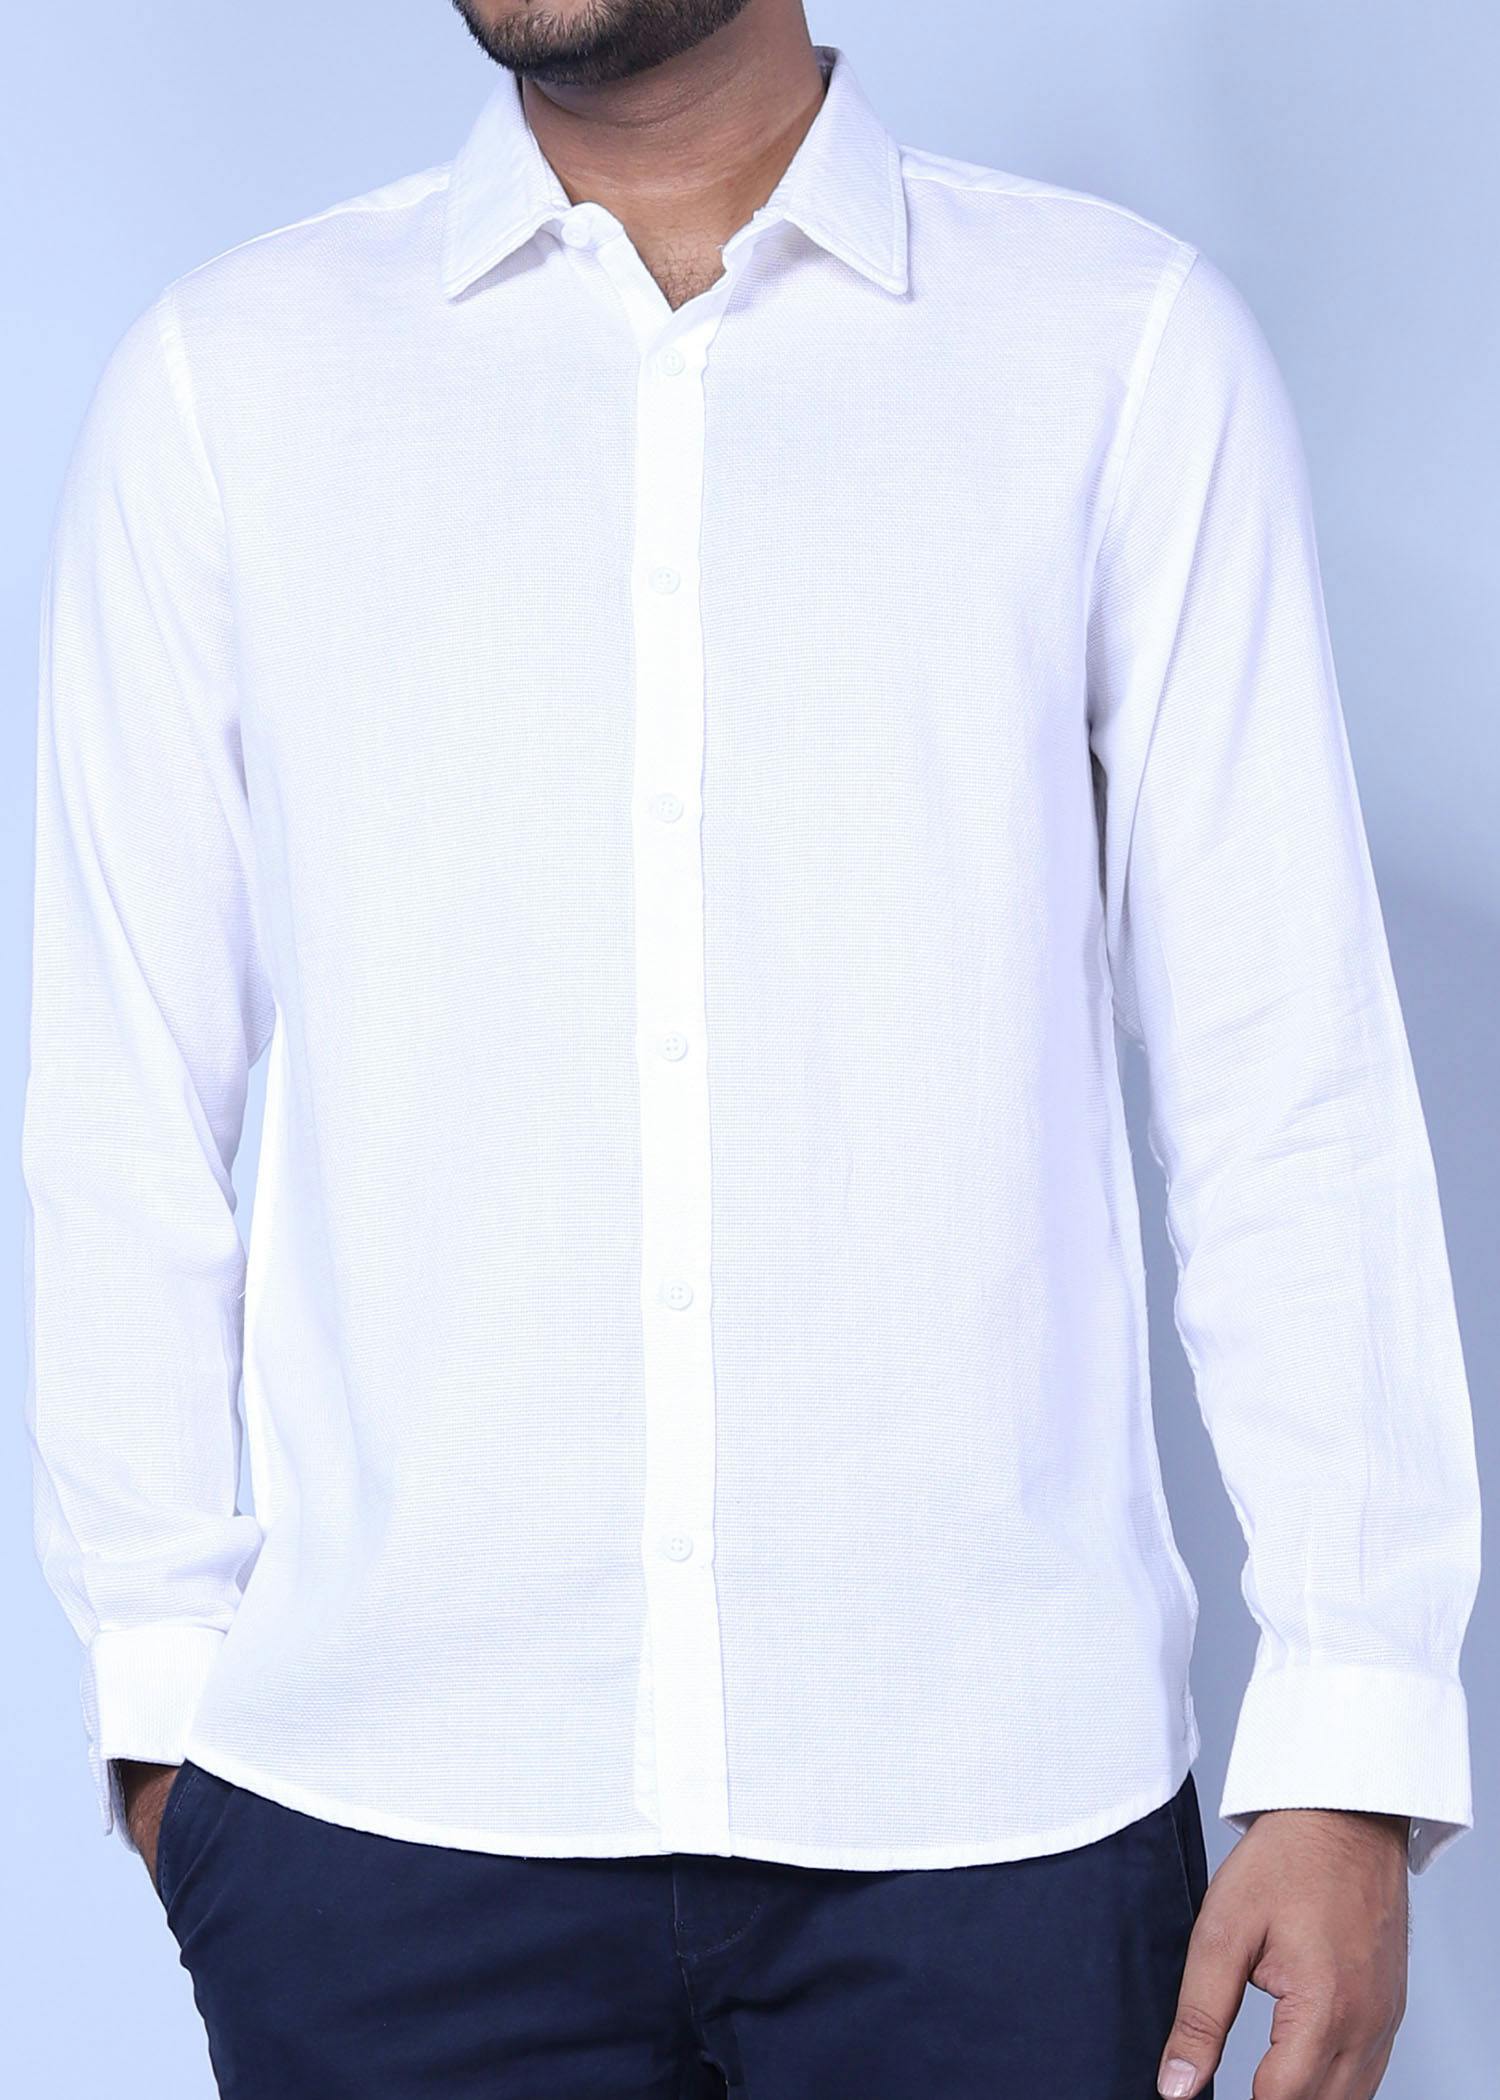 istanbul xv fs shirt white color facecropped